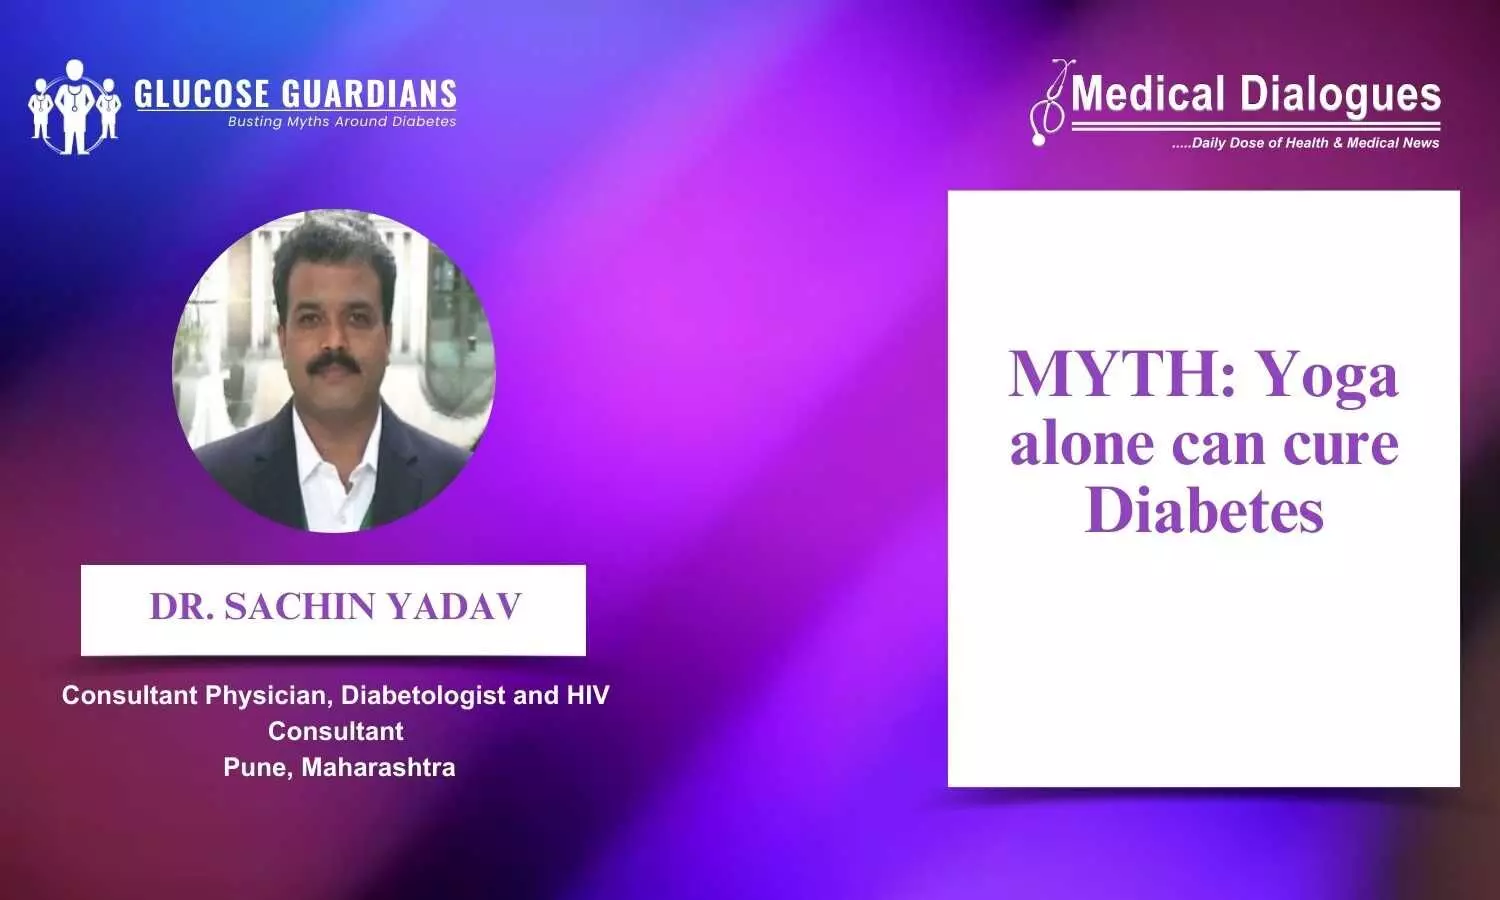 Debunking Myths Related to Yoga as a Cure for Diabetes - Dr Sachin Yadav